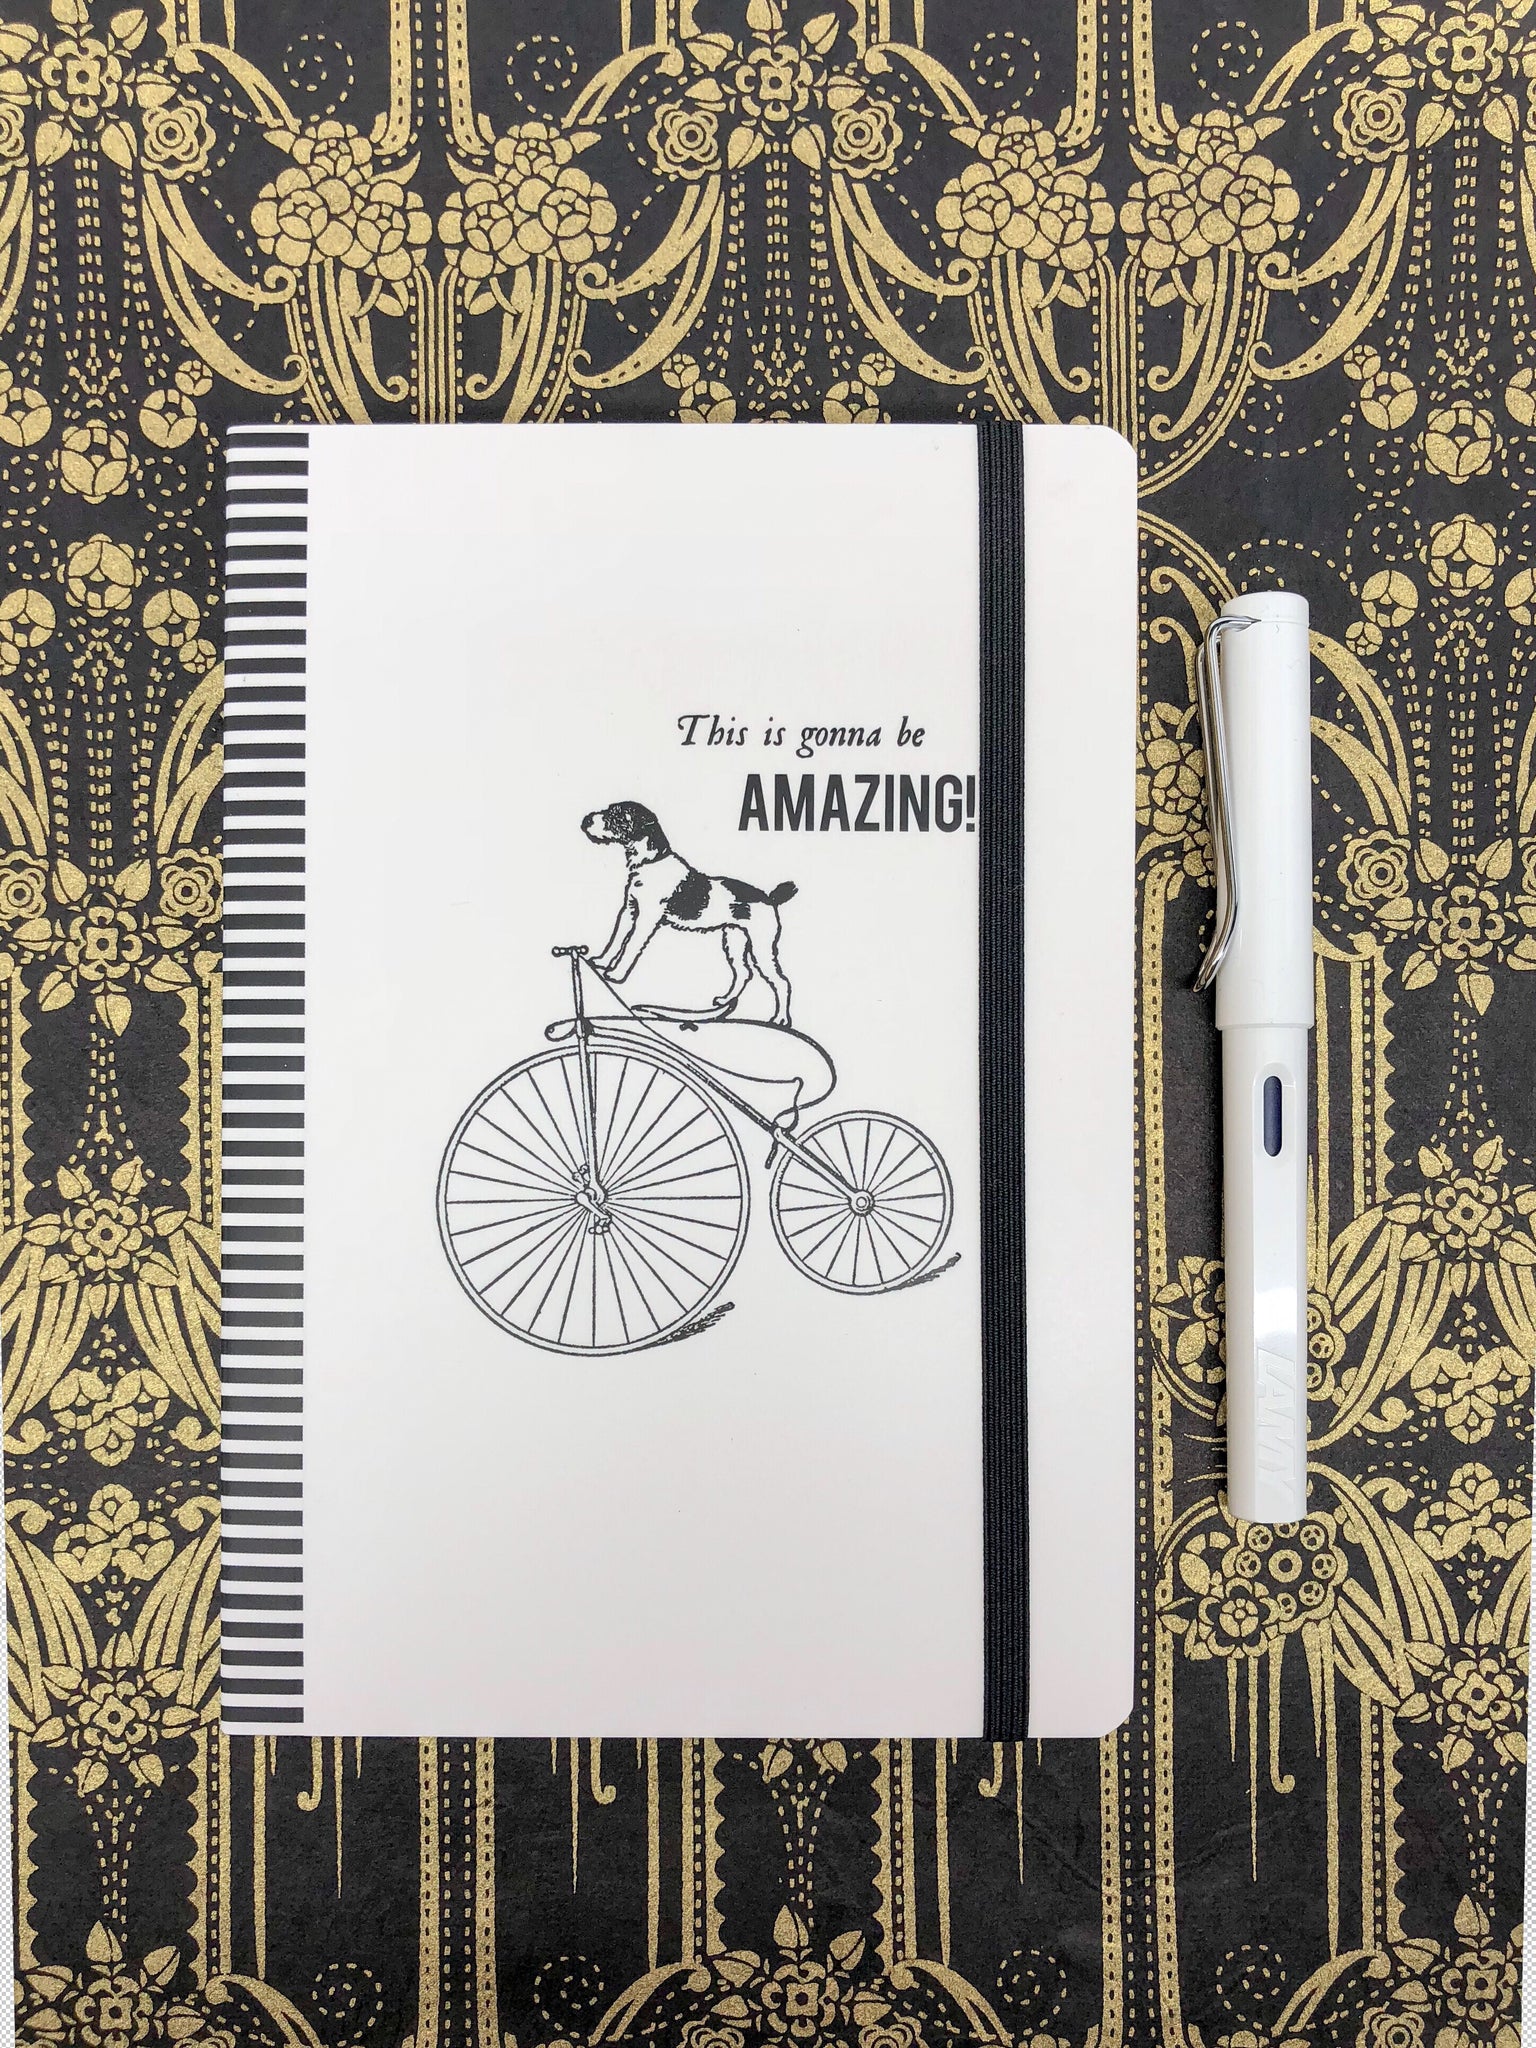 Alice Scott's "This is gonna be AMAZING!" Journal